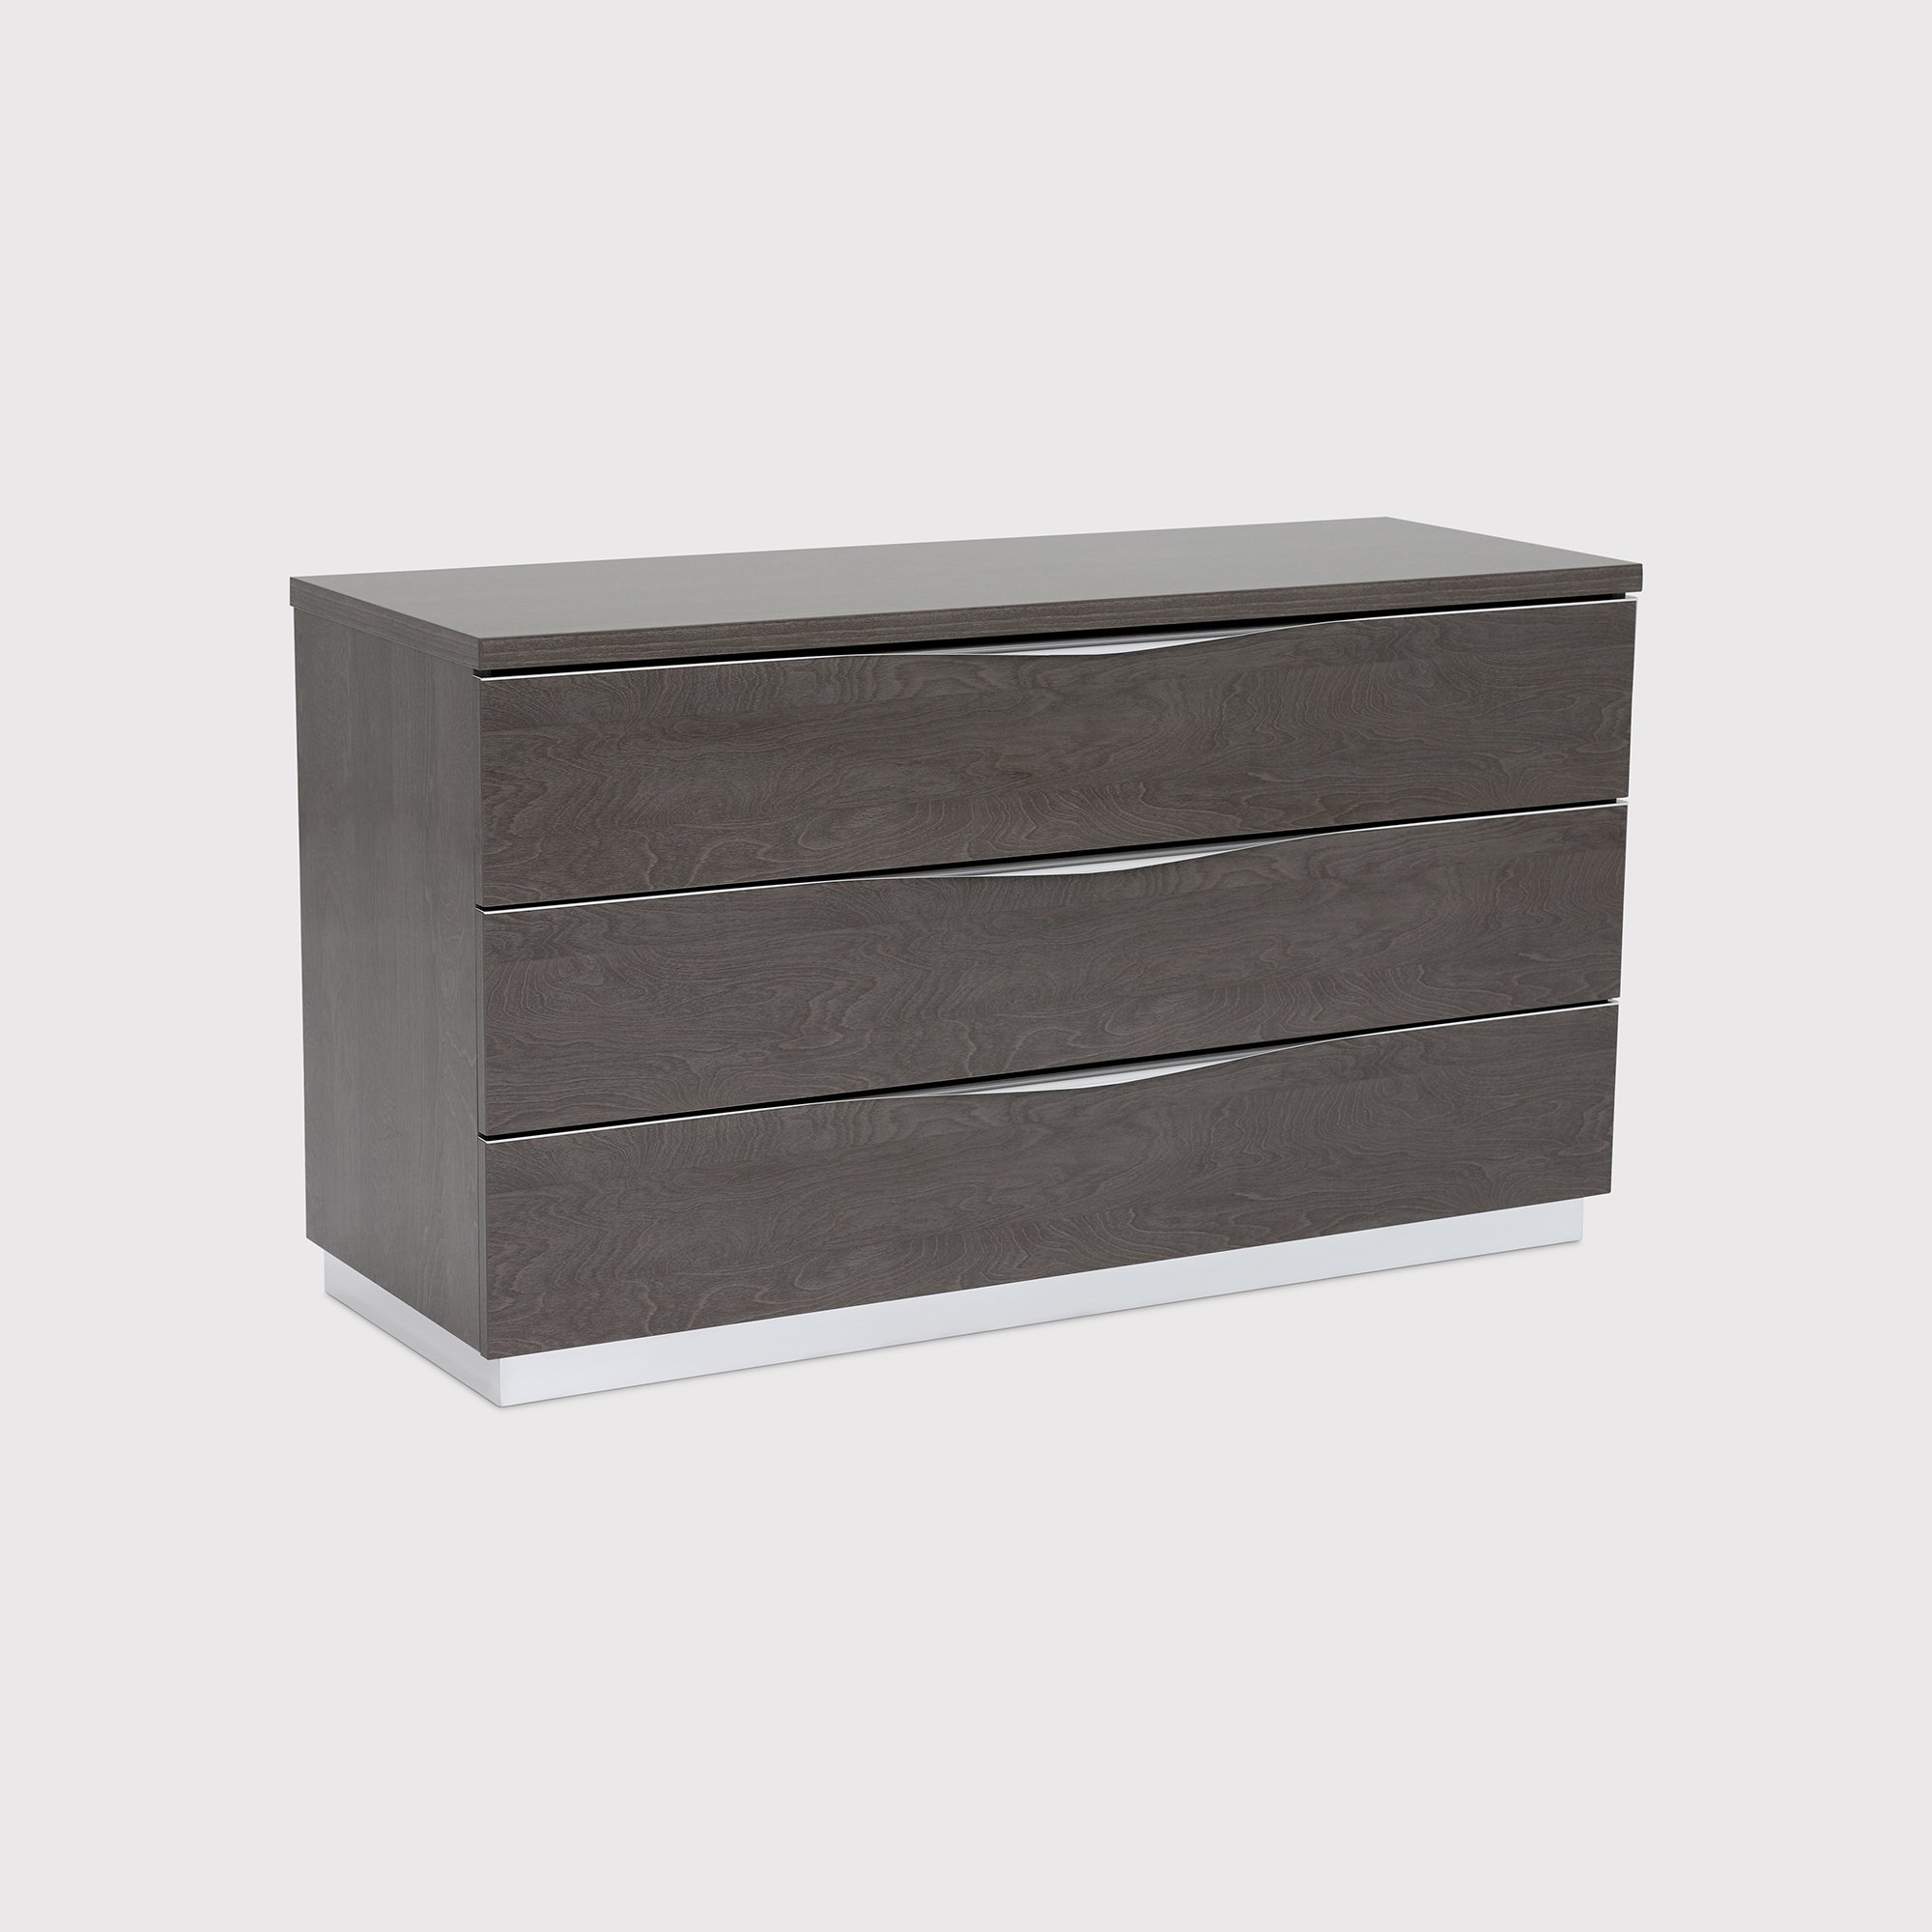 Lutyen Chest Of 3 Drawers, Brown | Barker & Stonehouse